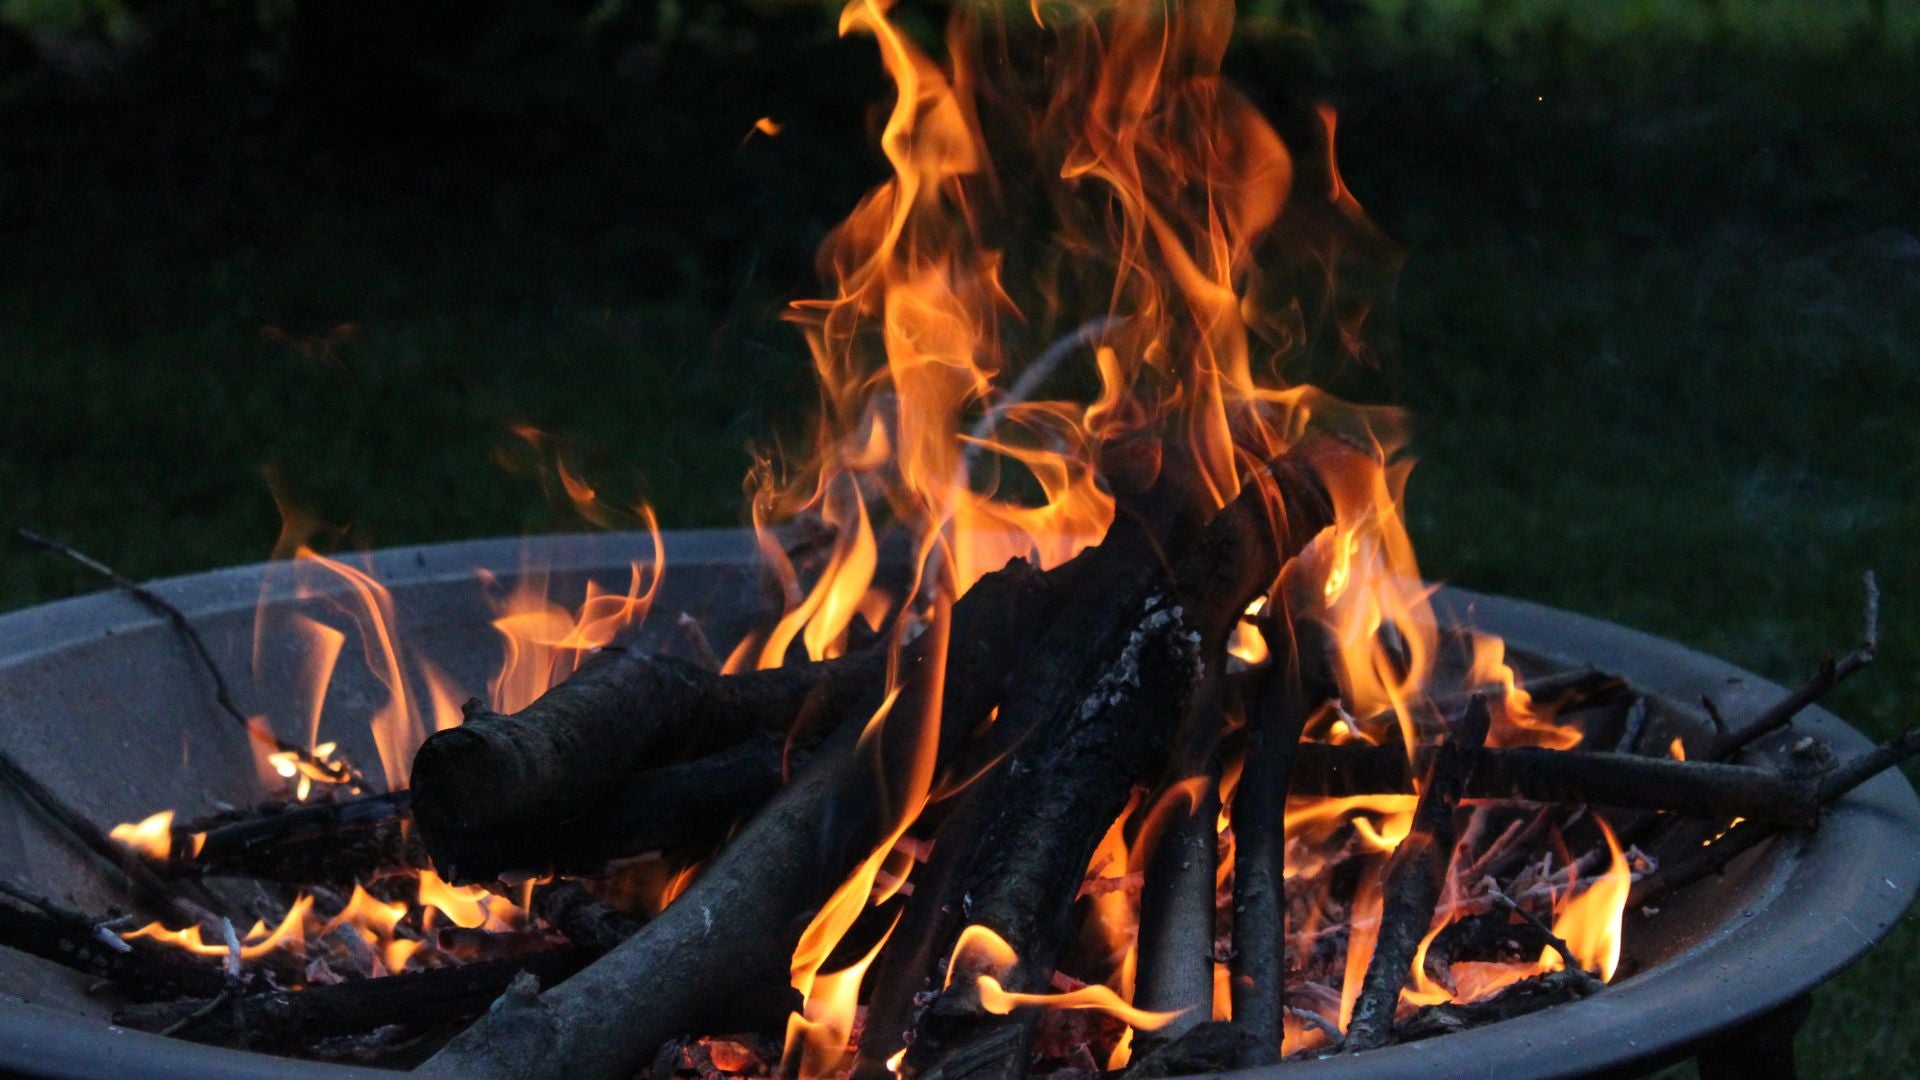 Fire Pit Safety for Kids and Pets